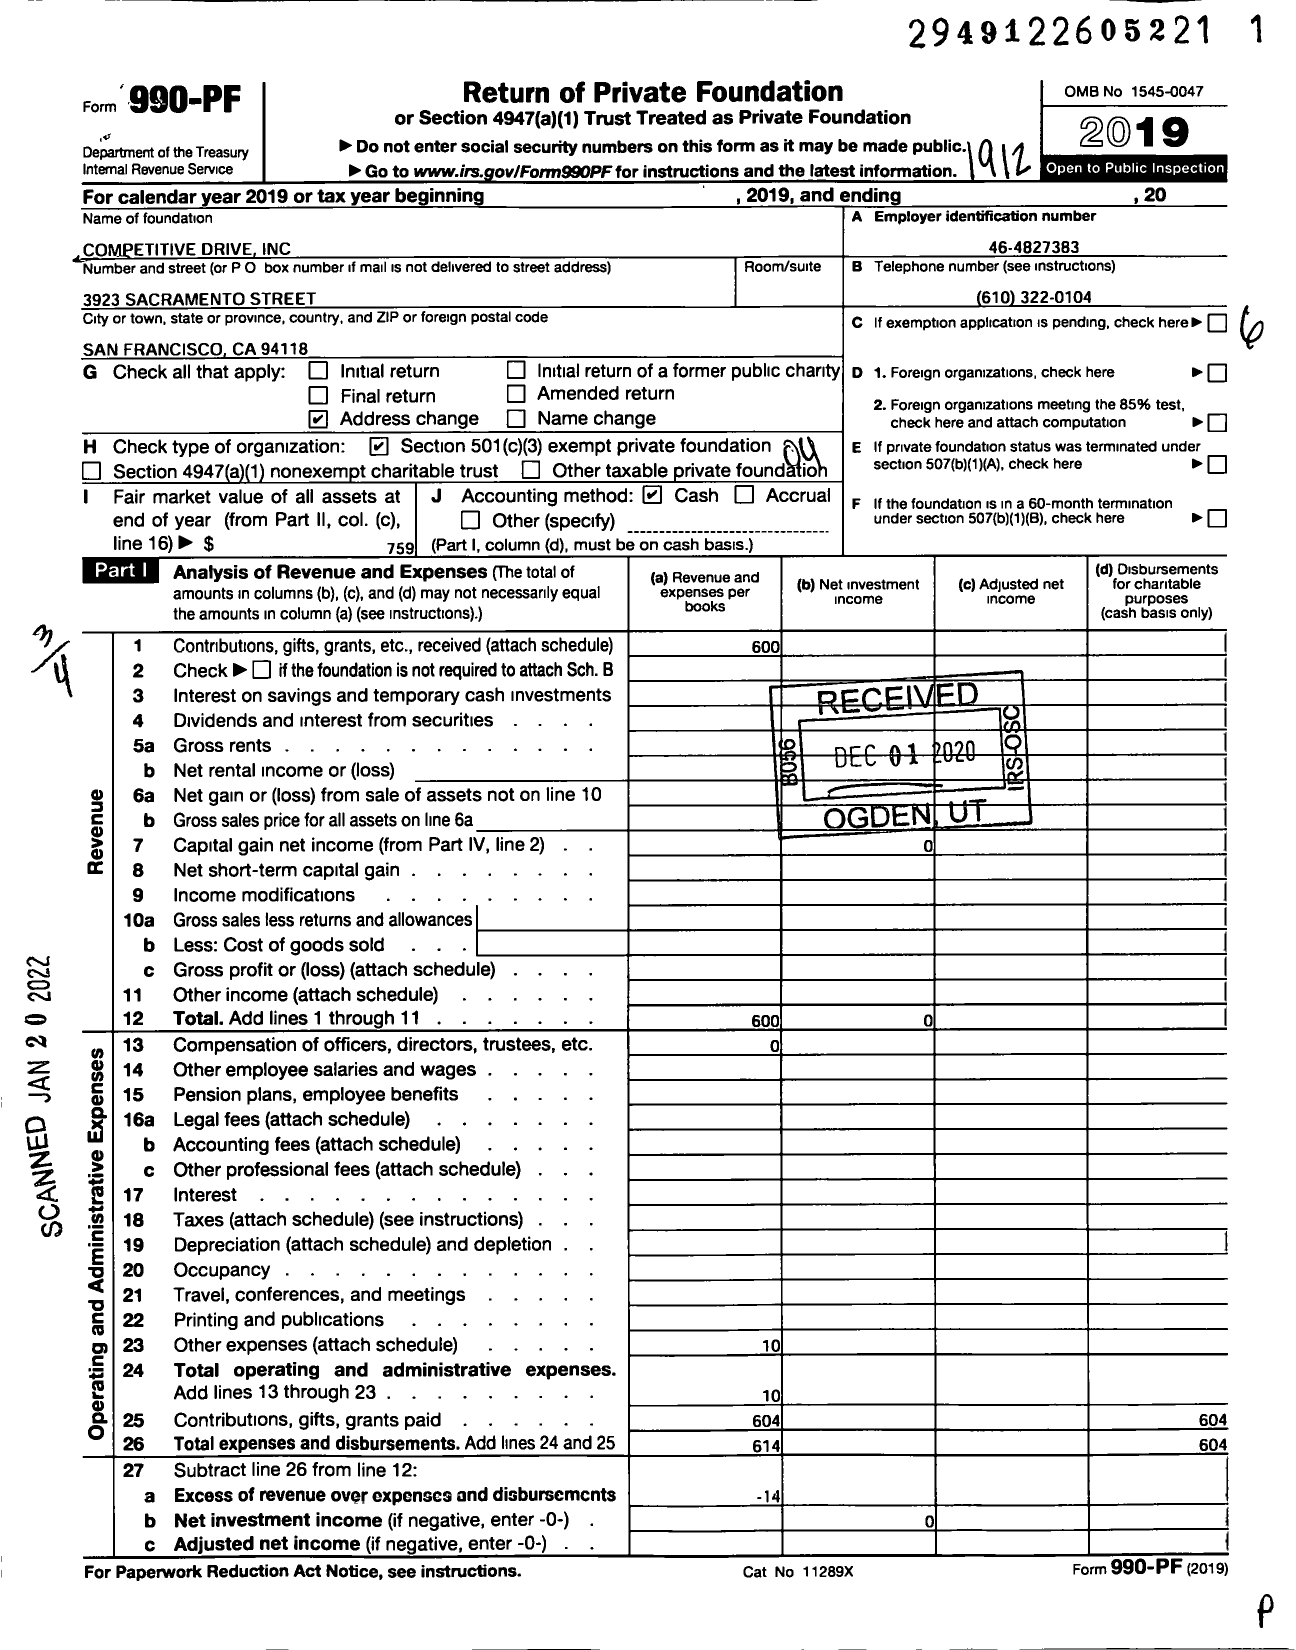 Image of first page of 2019 Form 990PF for Competitive Drive